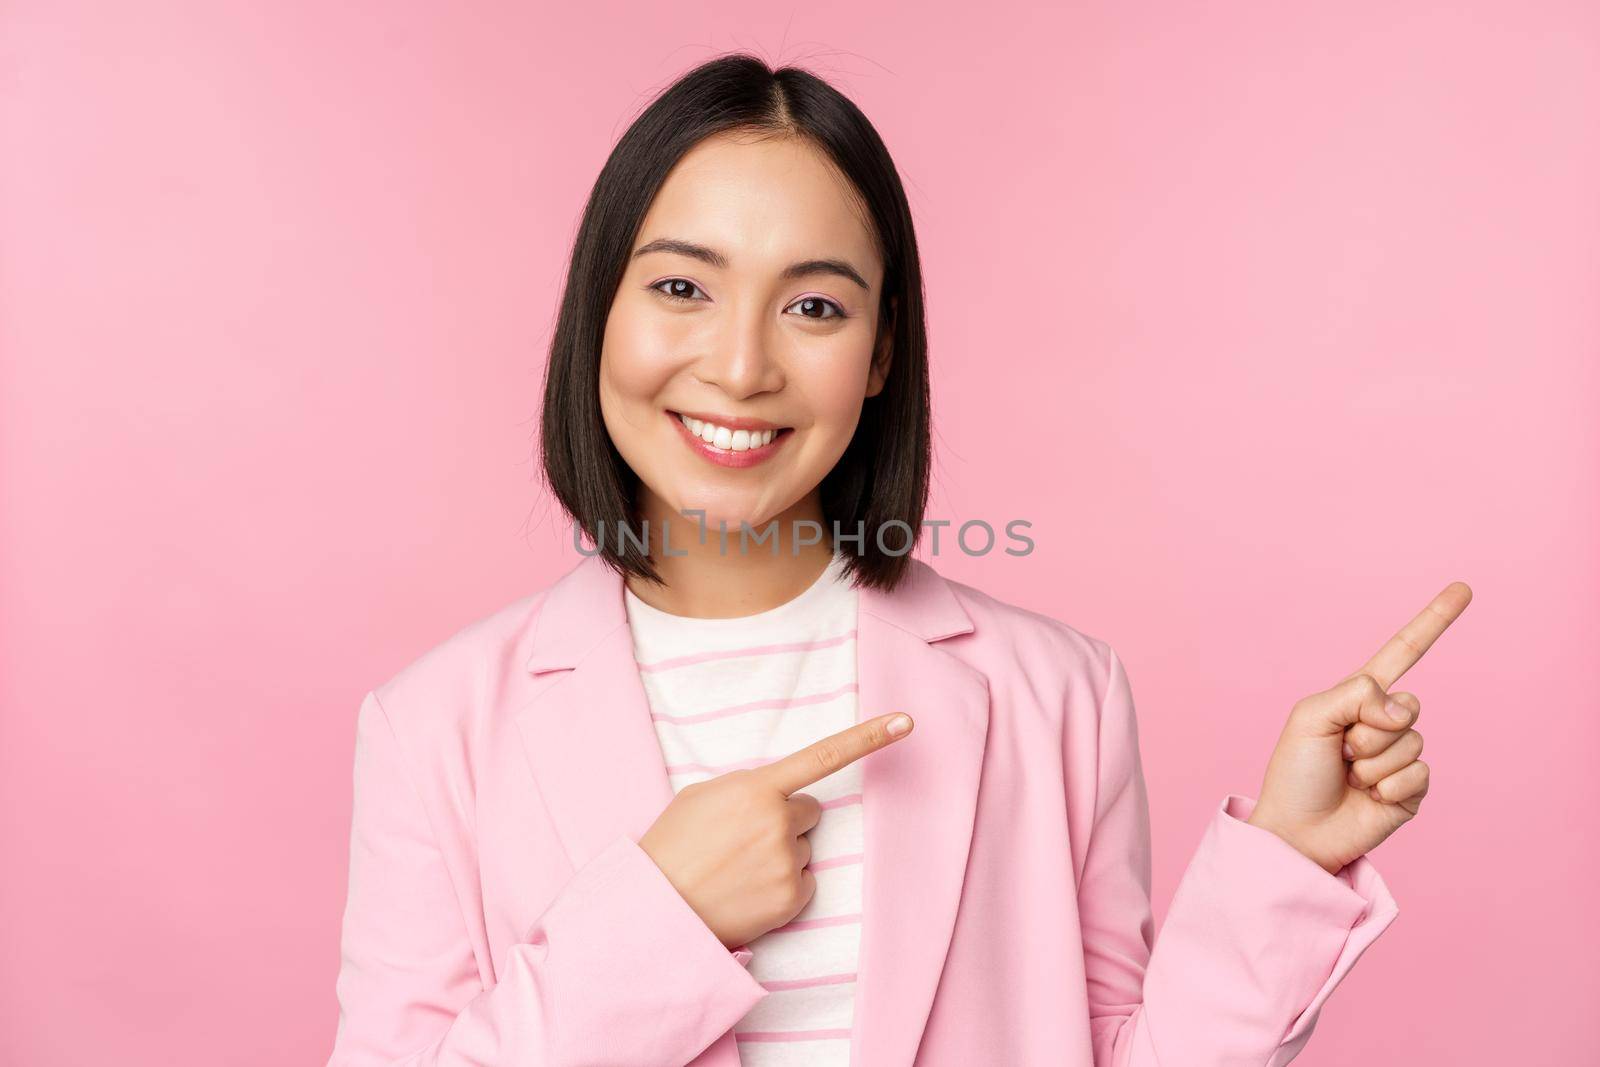 Enthusiastic professional businesswoman, saleswoman pointing fingers right, showing advertisement or company logo aside, posing over pink background.